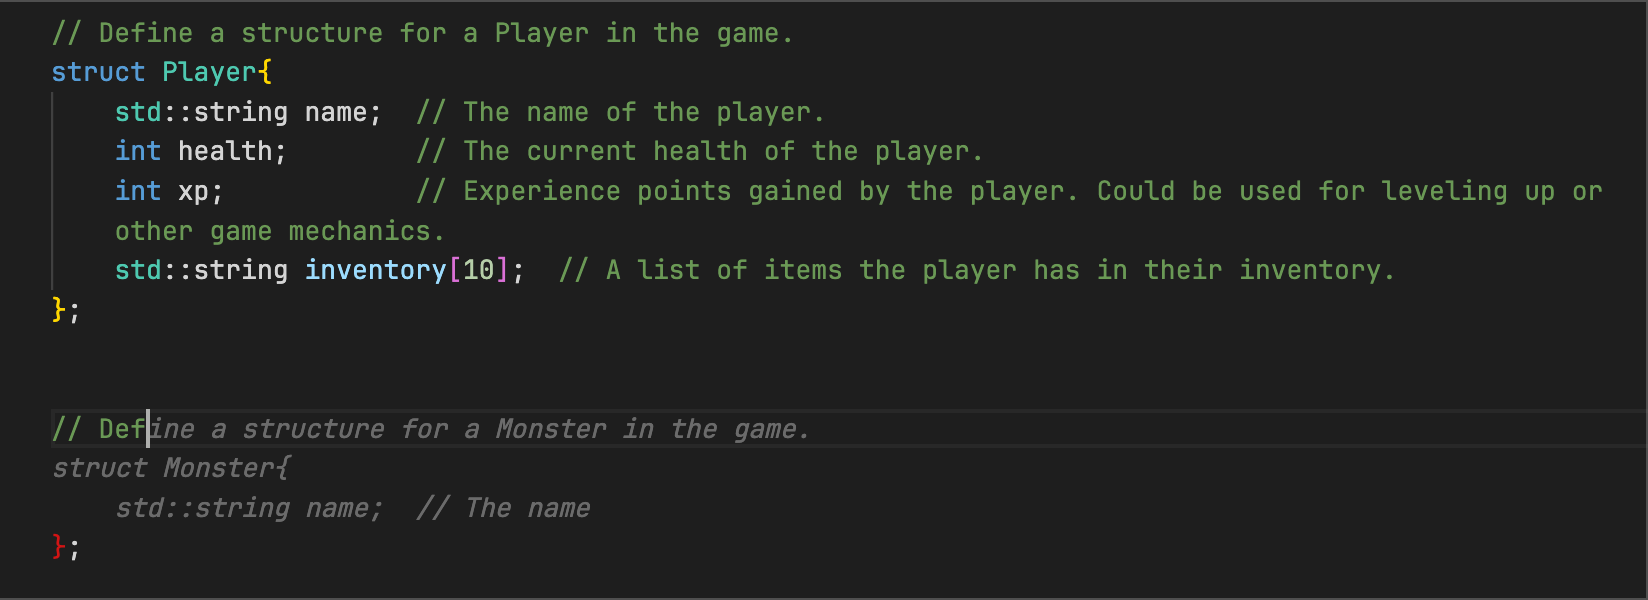 adventure.cpp - Code Suggestions wants to add a struct for Monsters we can battle